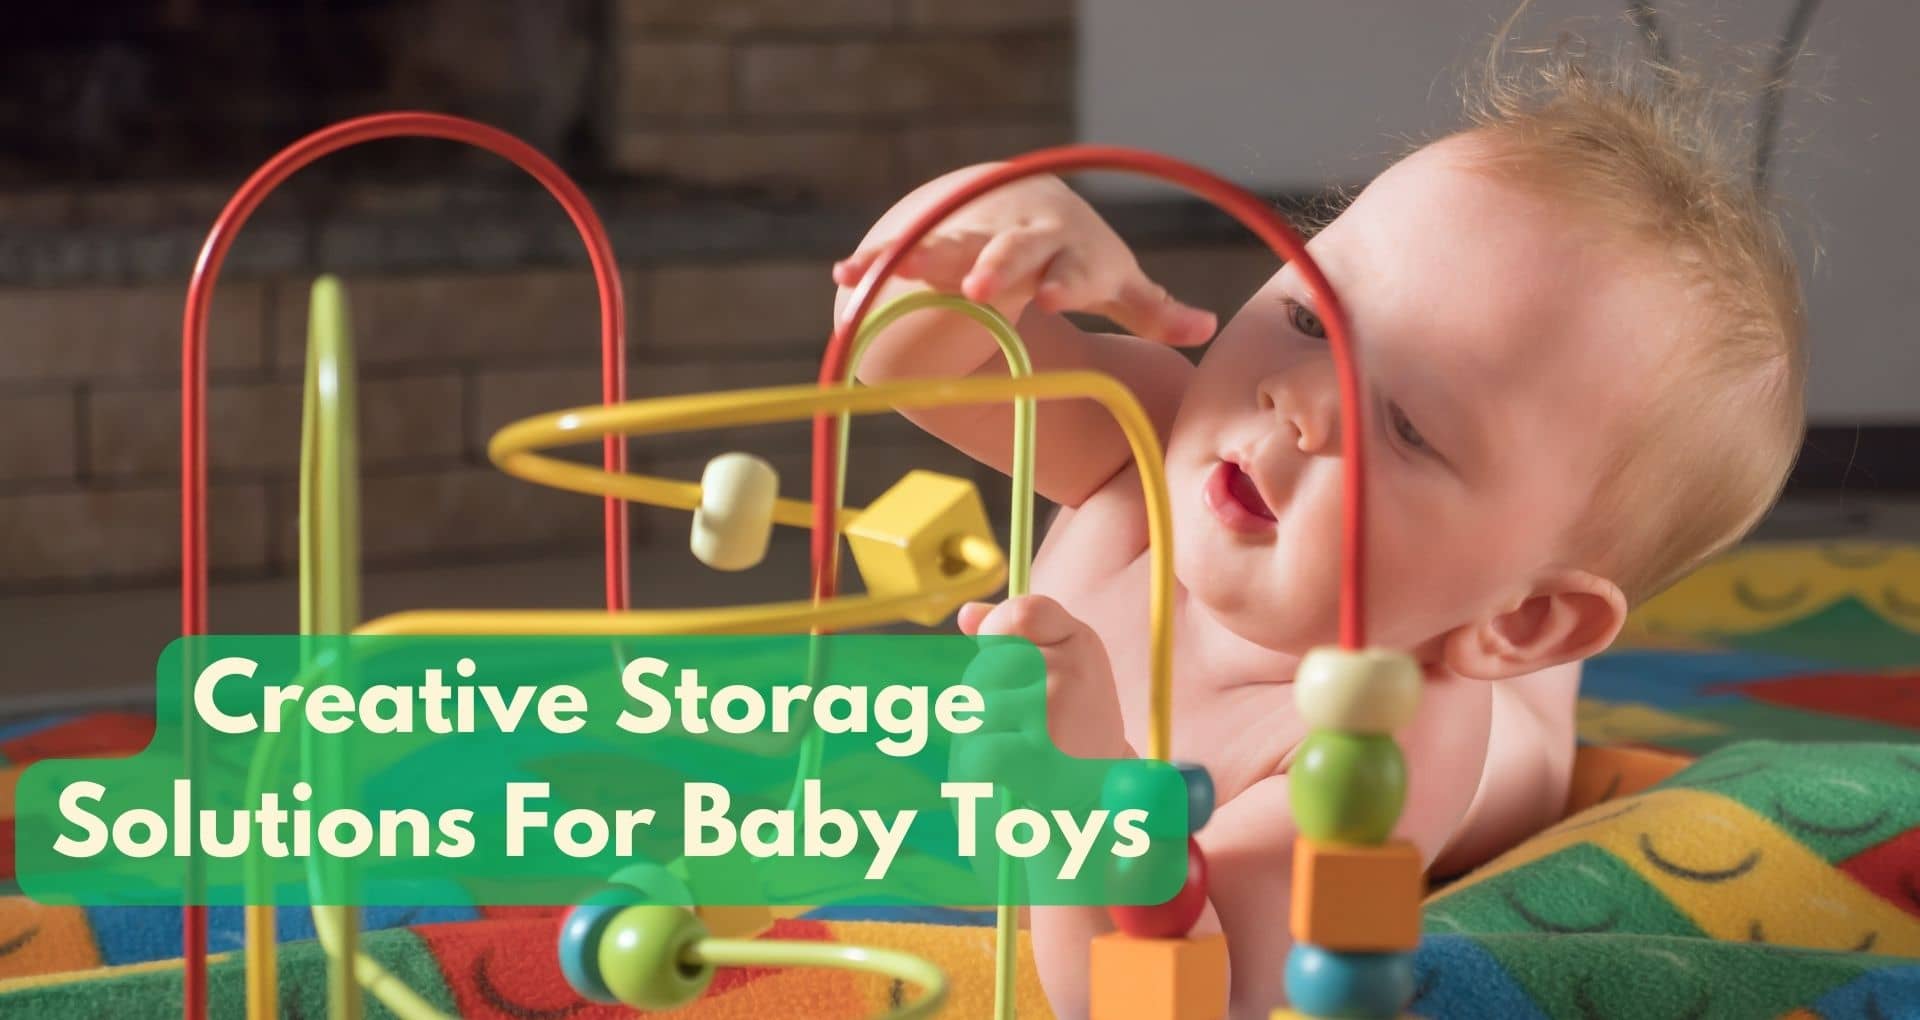 What Are Some Creative Storage Solutions For Baby Toys?